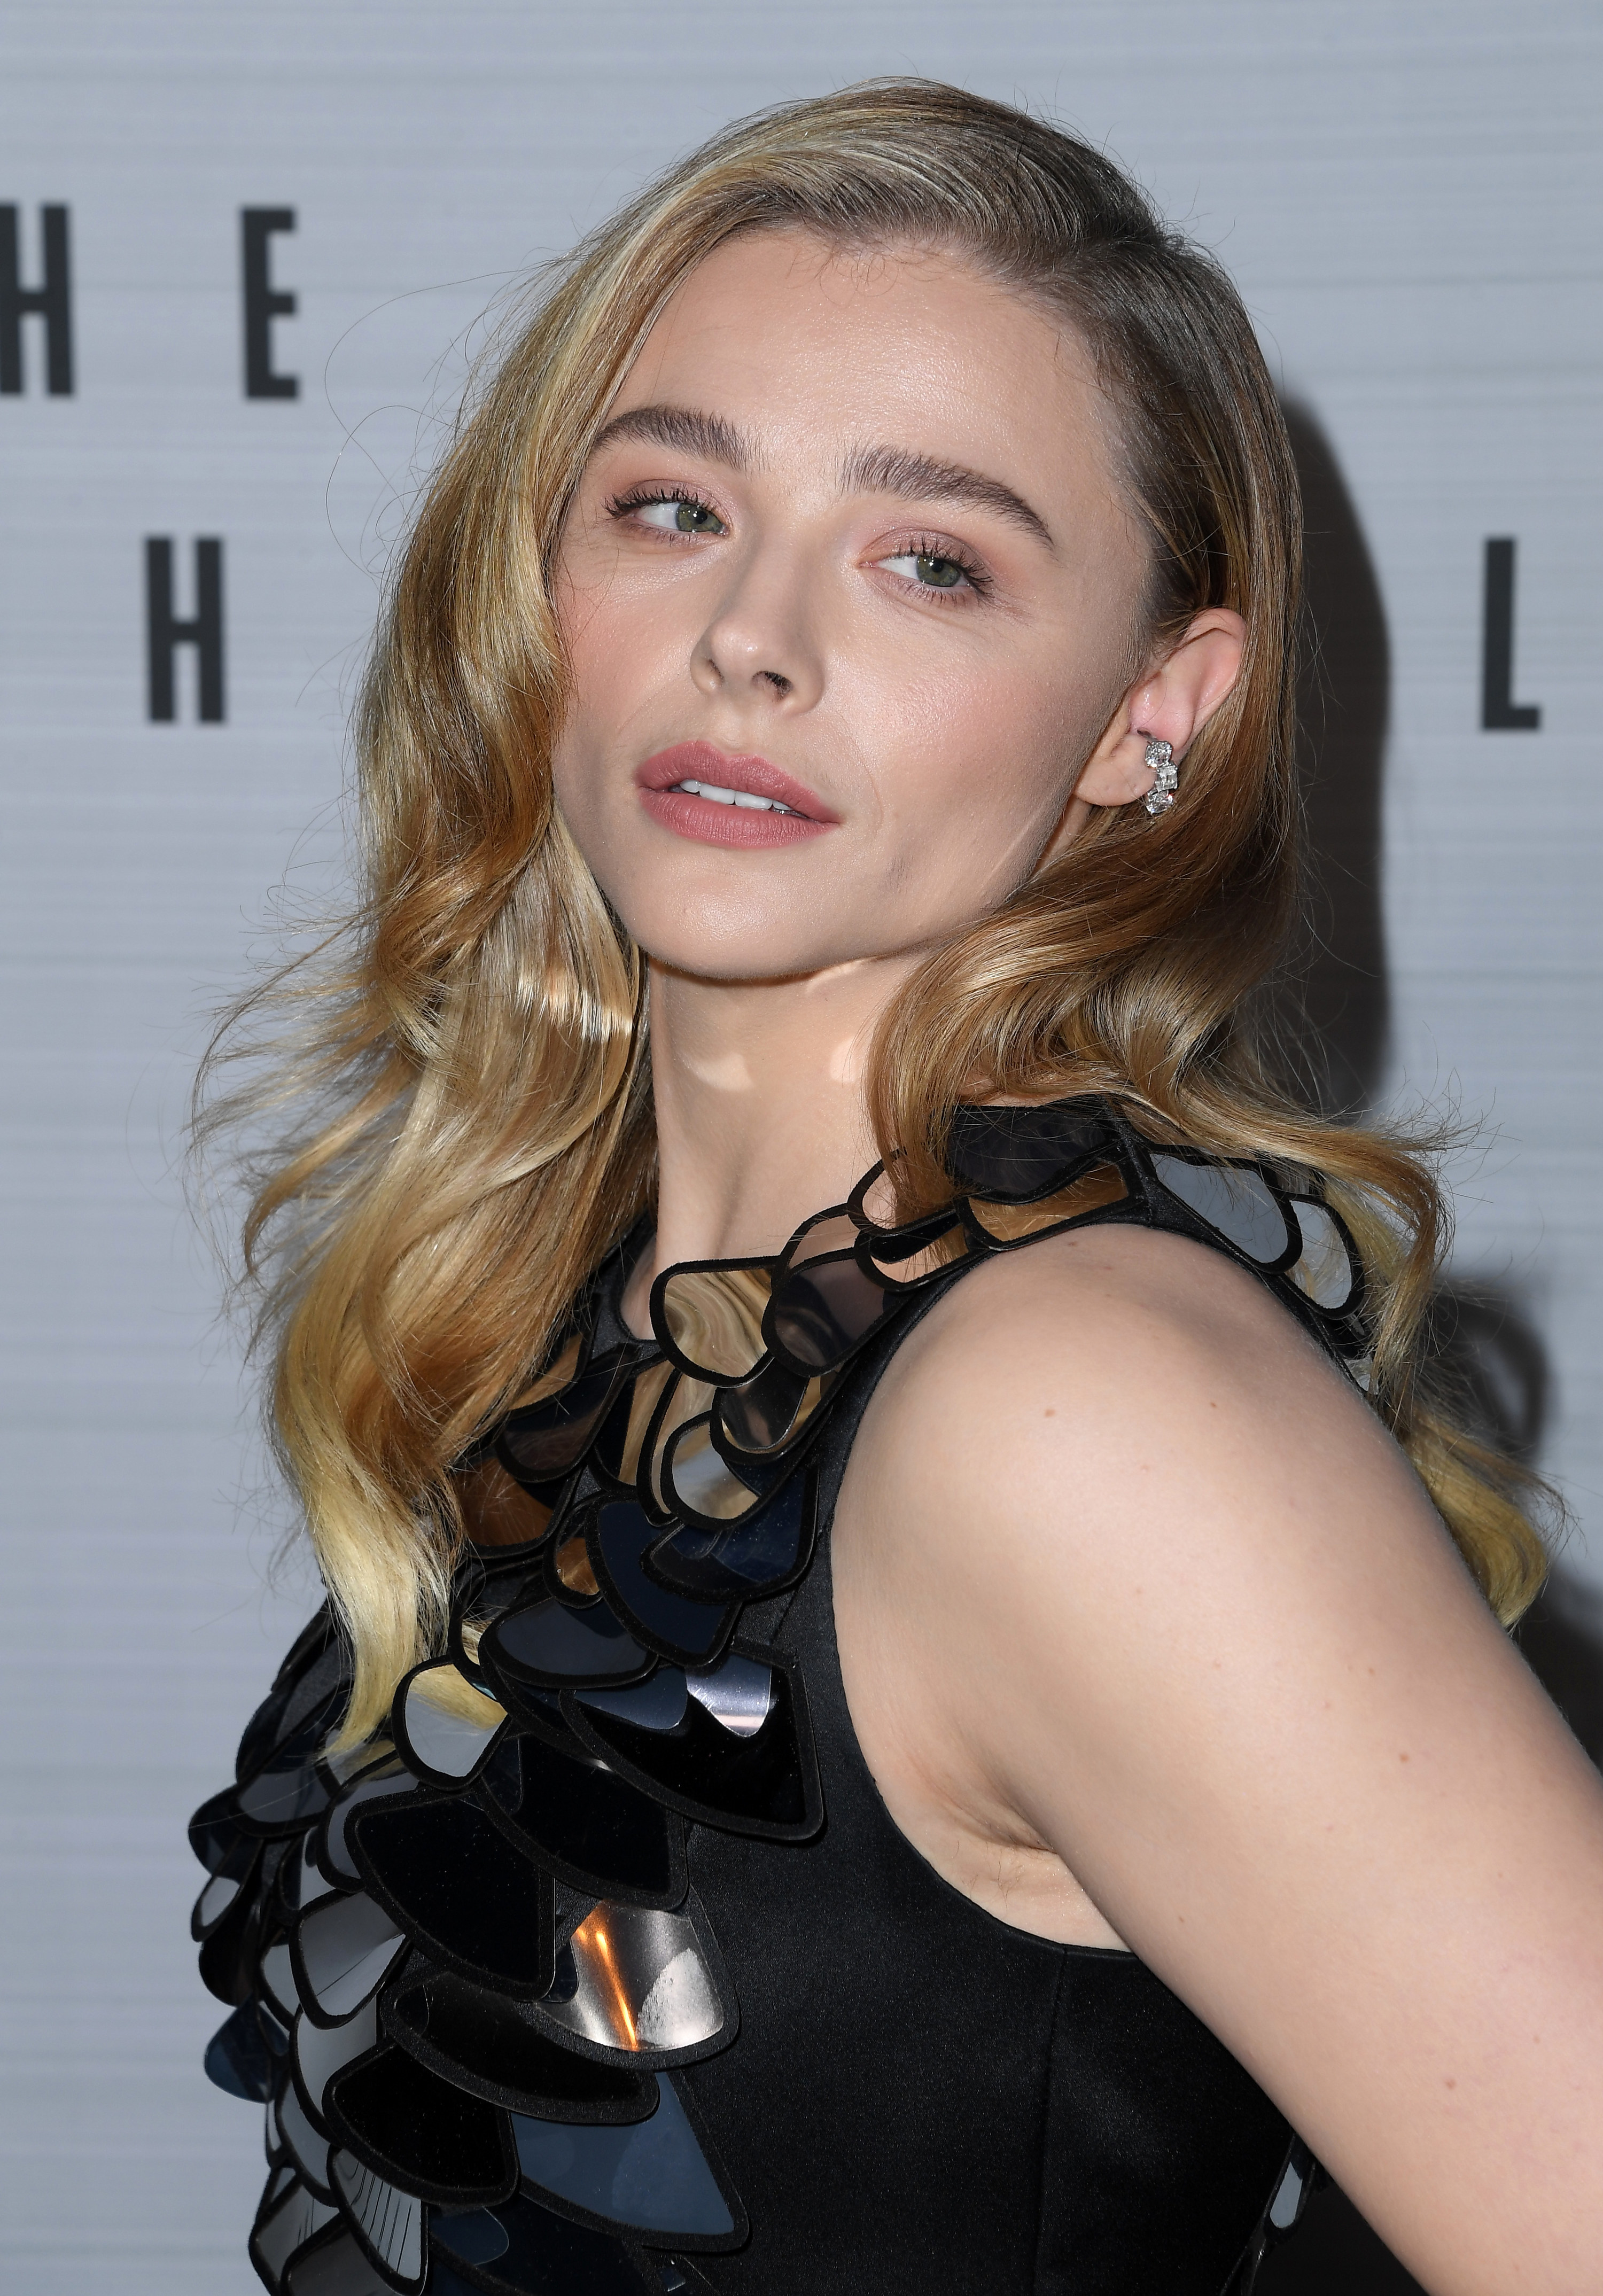 17-year-old actress Chloë Grace Moretz tackles grown-up issues